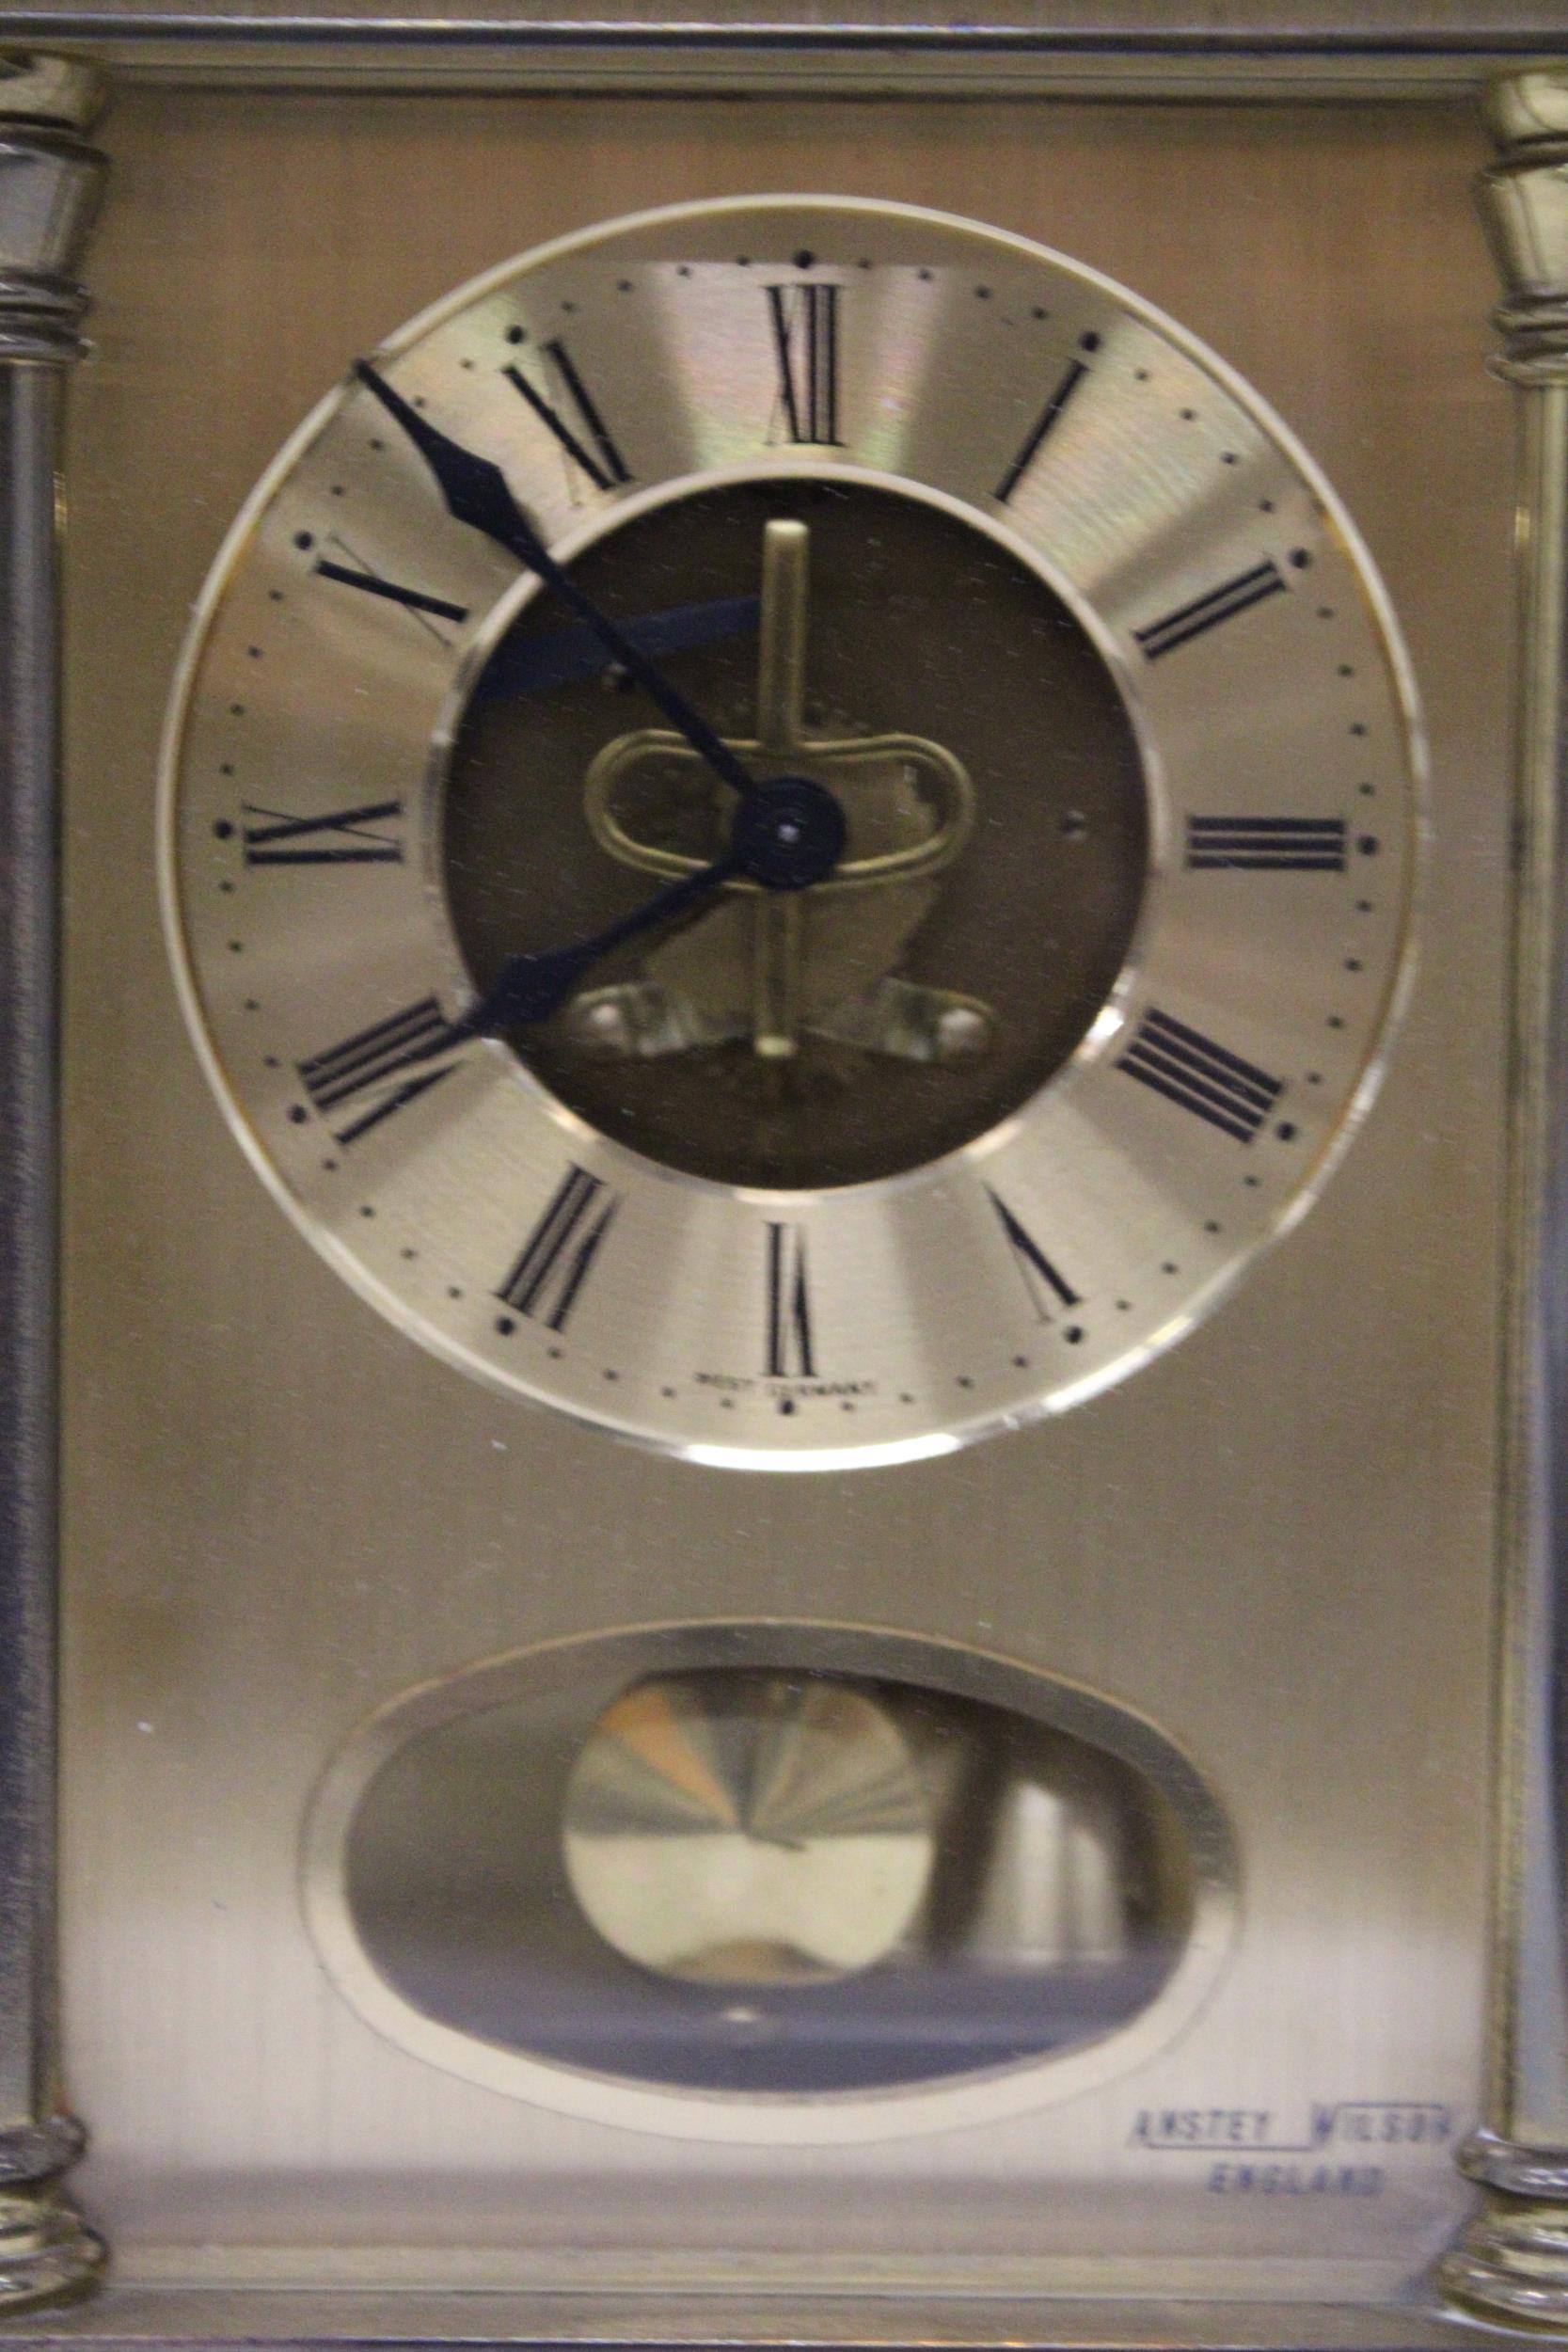 AN 'ANSTEY WILSON' MECHANICAL CARRIAGE CLOCK, WITH PRESENTATION PLAQUE TO THE BACK - Image 2 of 6